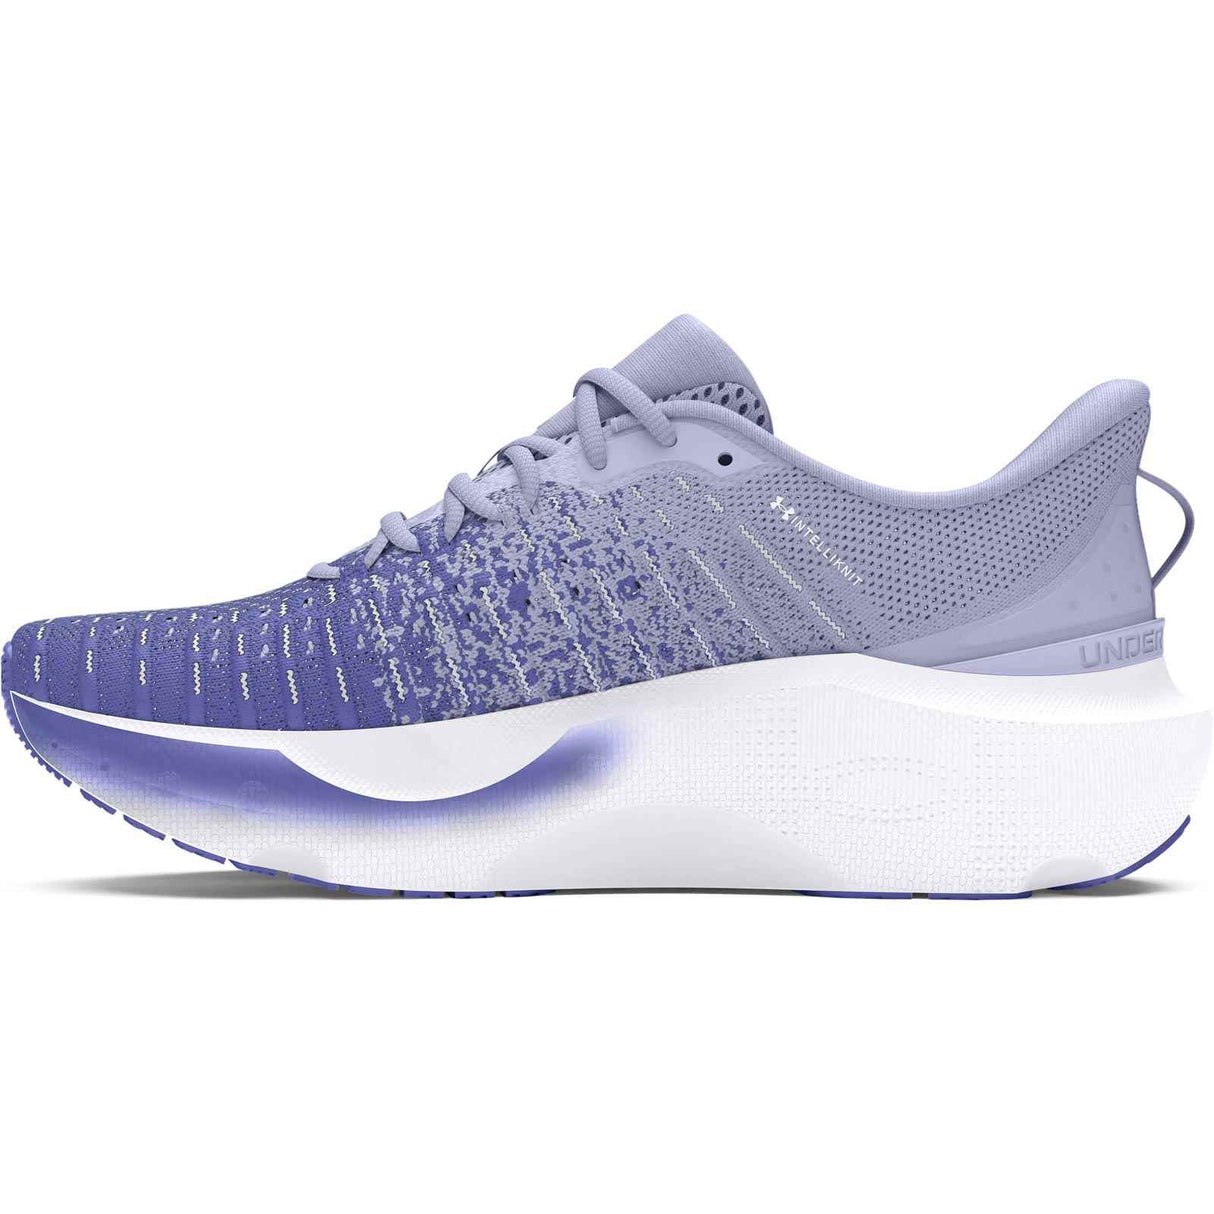 Under Armour Infinite Elite Womens Running Shoes